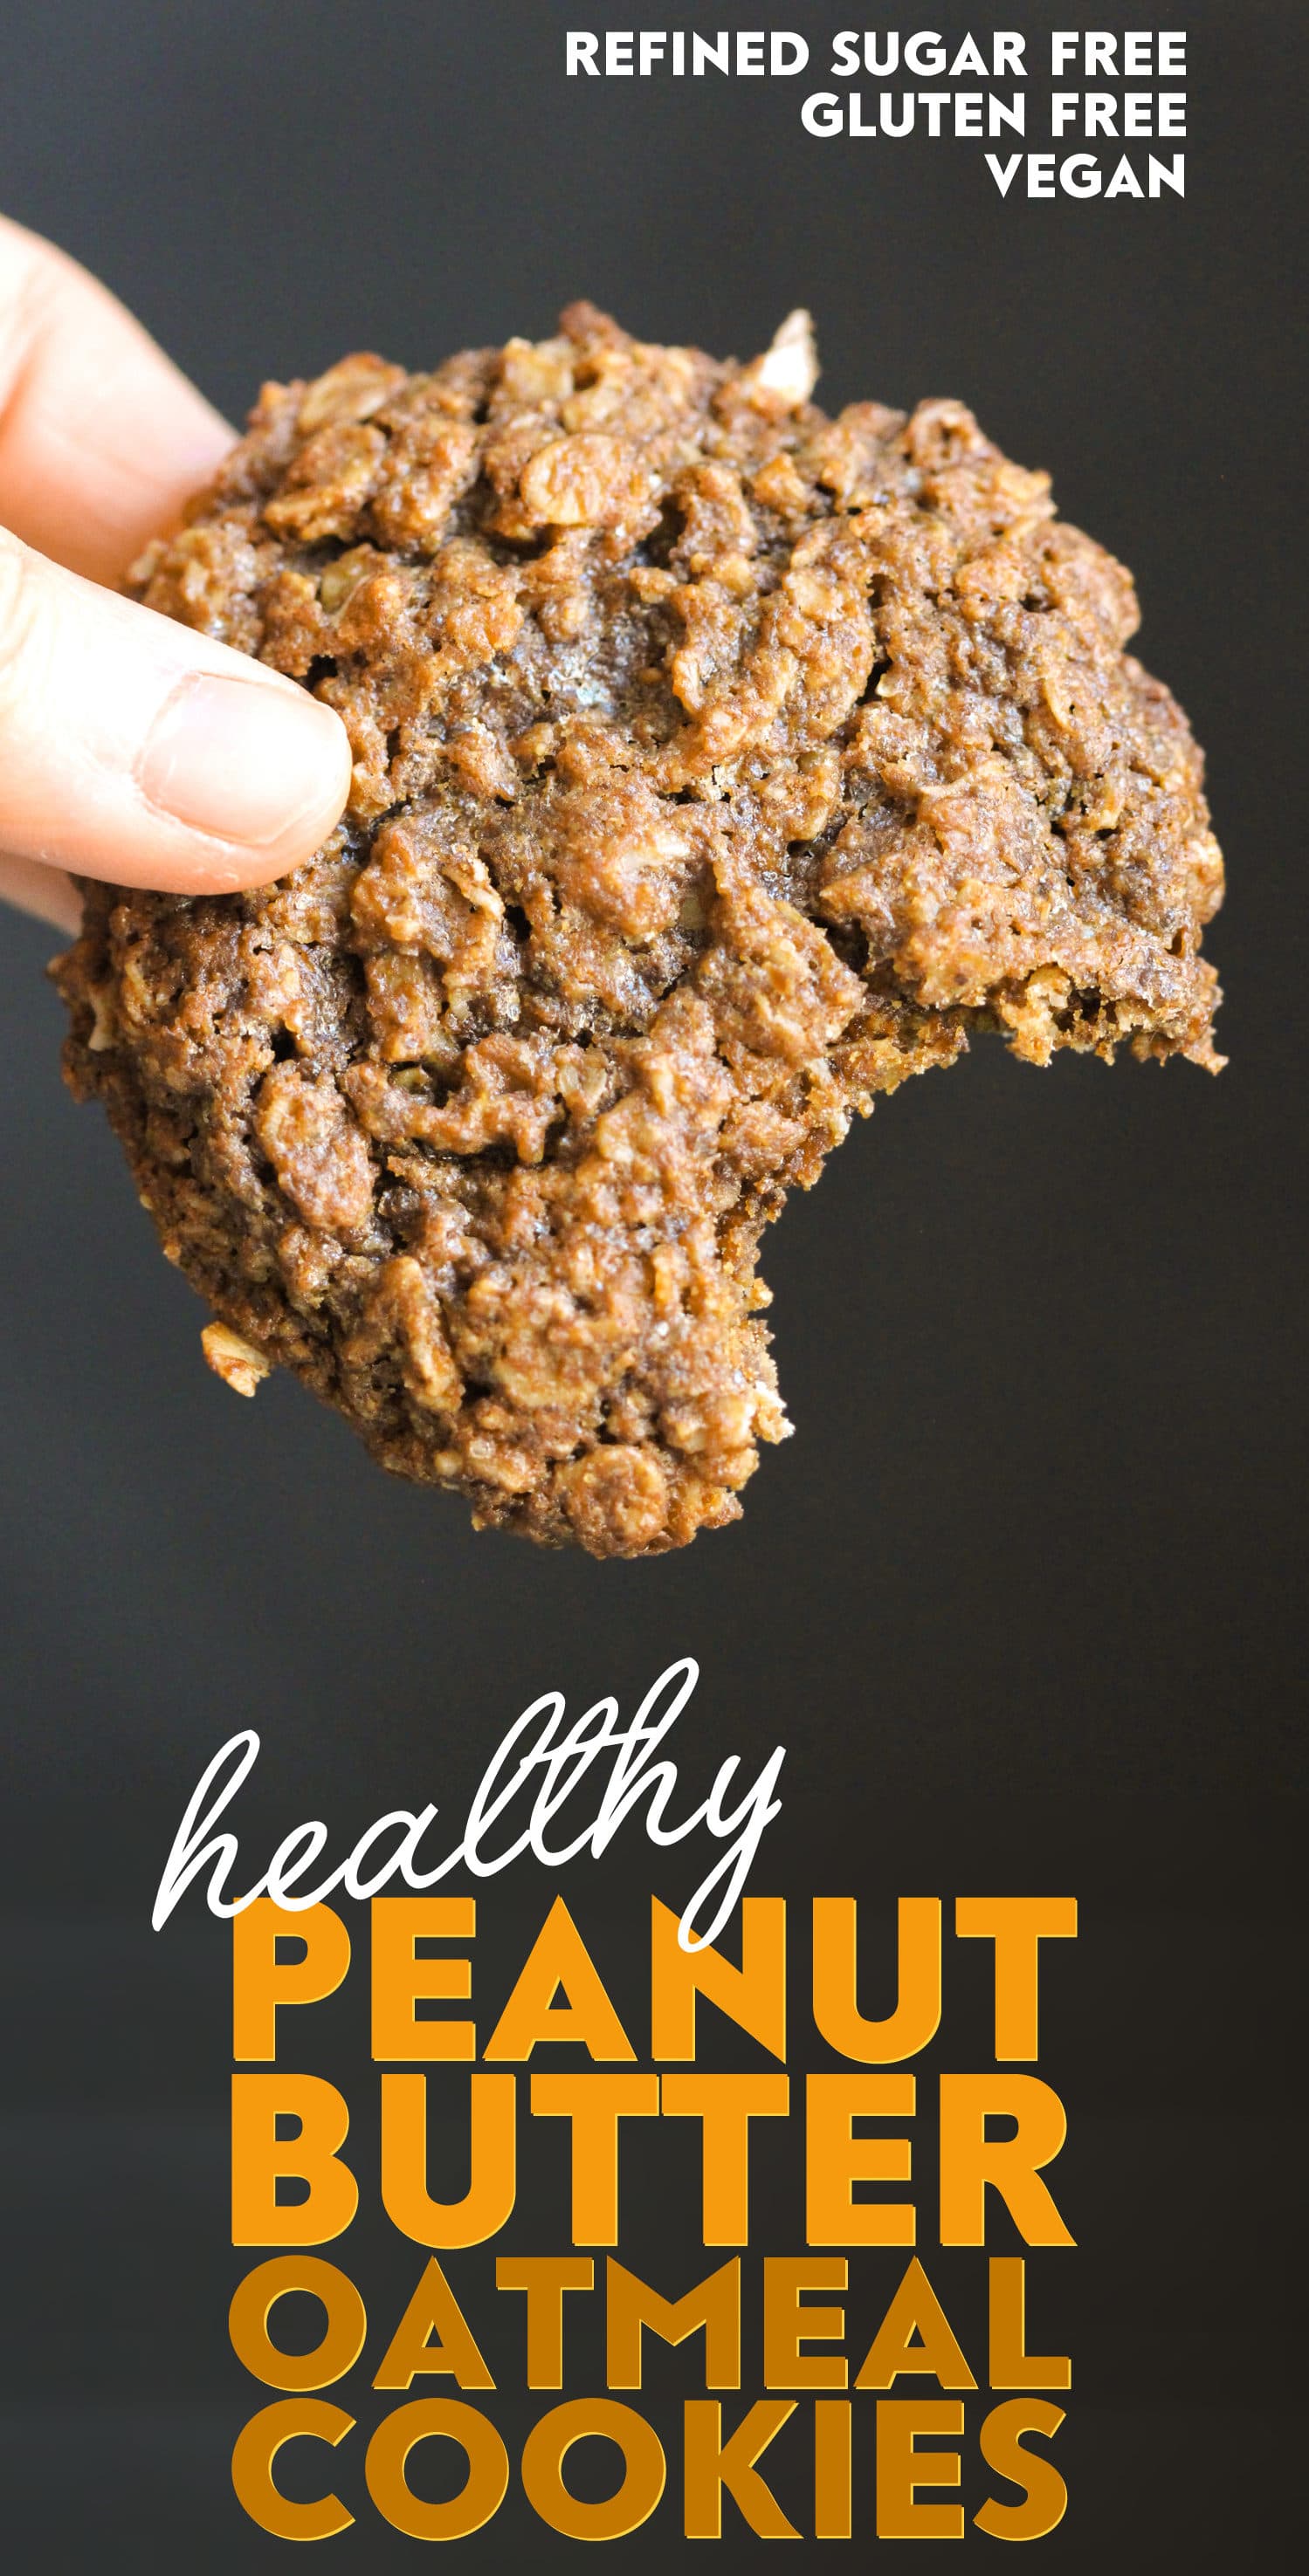 Healthy Chewy Peanut Butter Oatmeal Cookies recipe! These secretly guilt-free cookies are refined sugar free, gluten free, dairy free, eggless, and vegan, but you would never ever EVER suspect it! Healthy Dessert Recipes at Desserts with Benefits